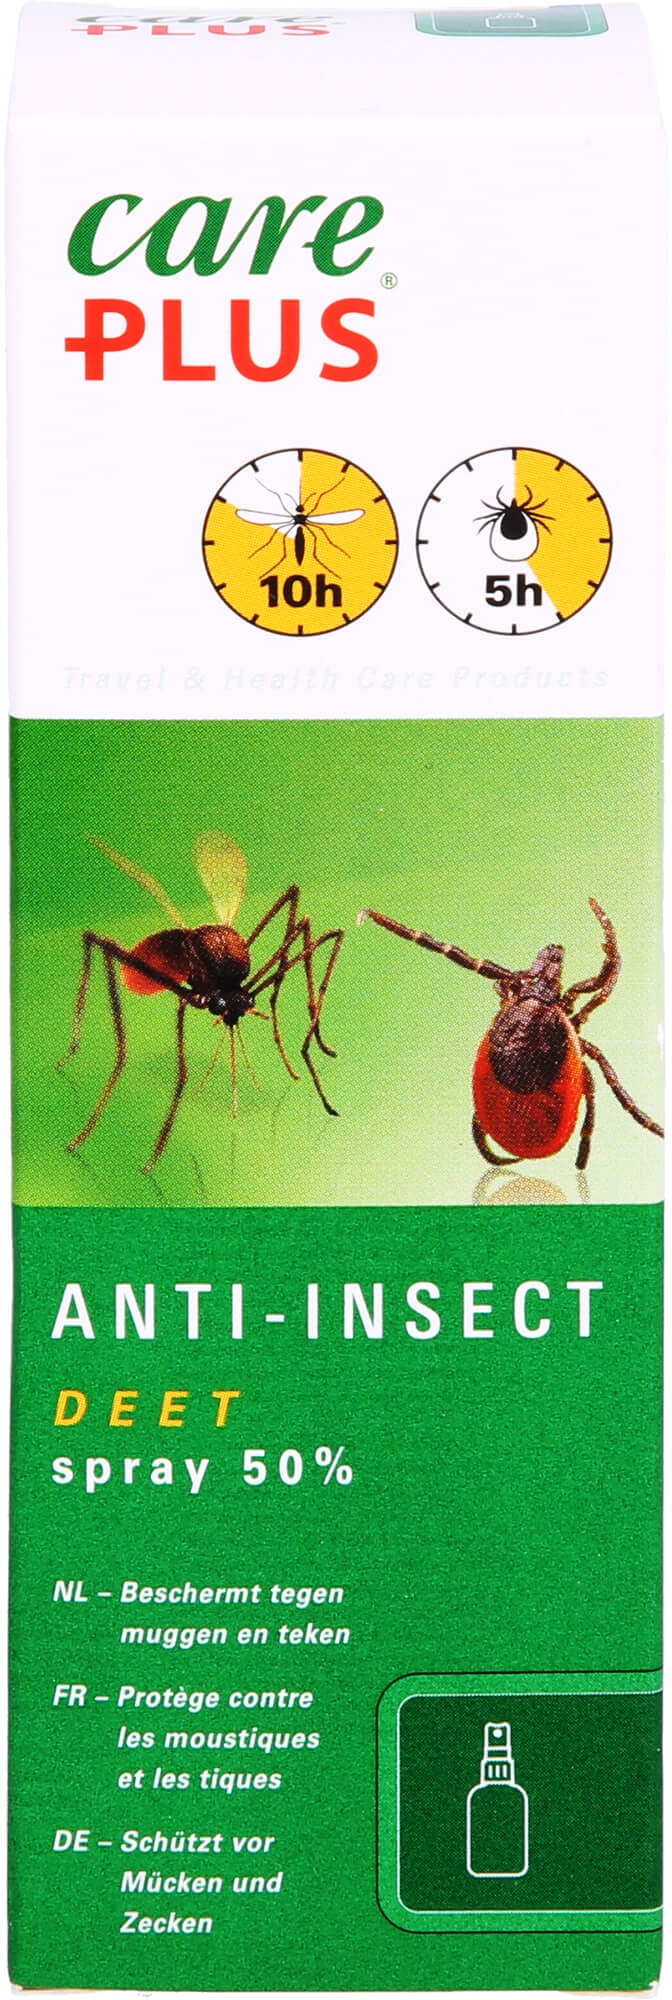 care plus anti-insect deet 50